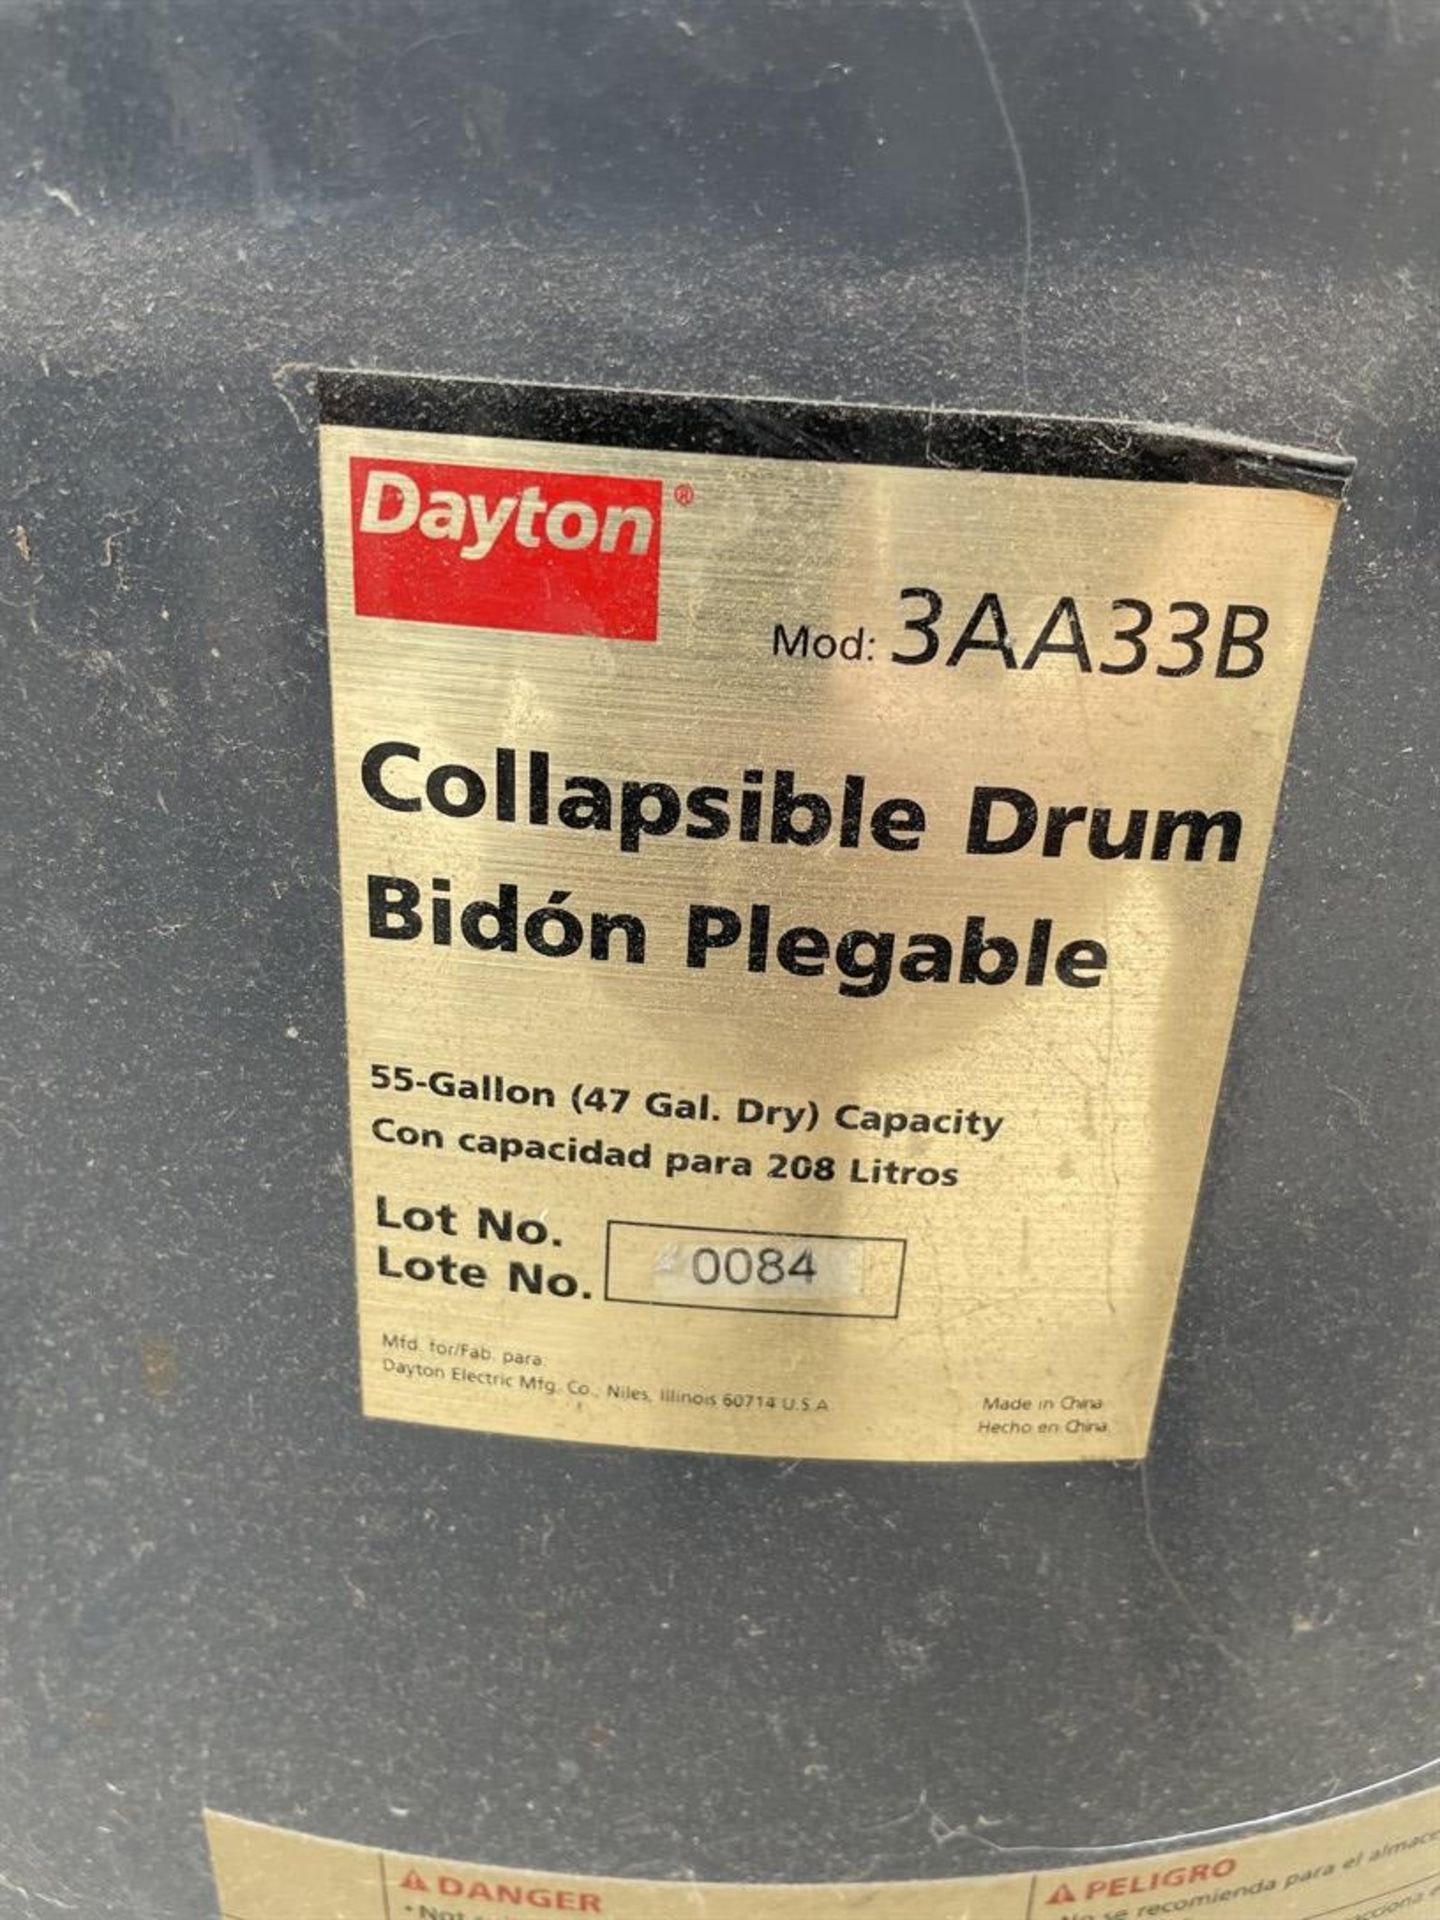 DAYTON 3AA33B Collapsible Drum Dust Collector - Image 2 of 2